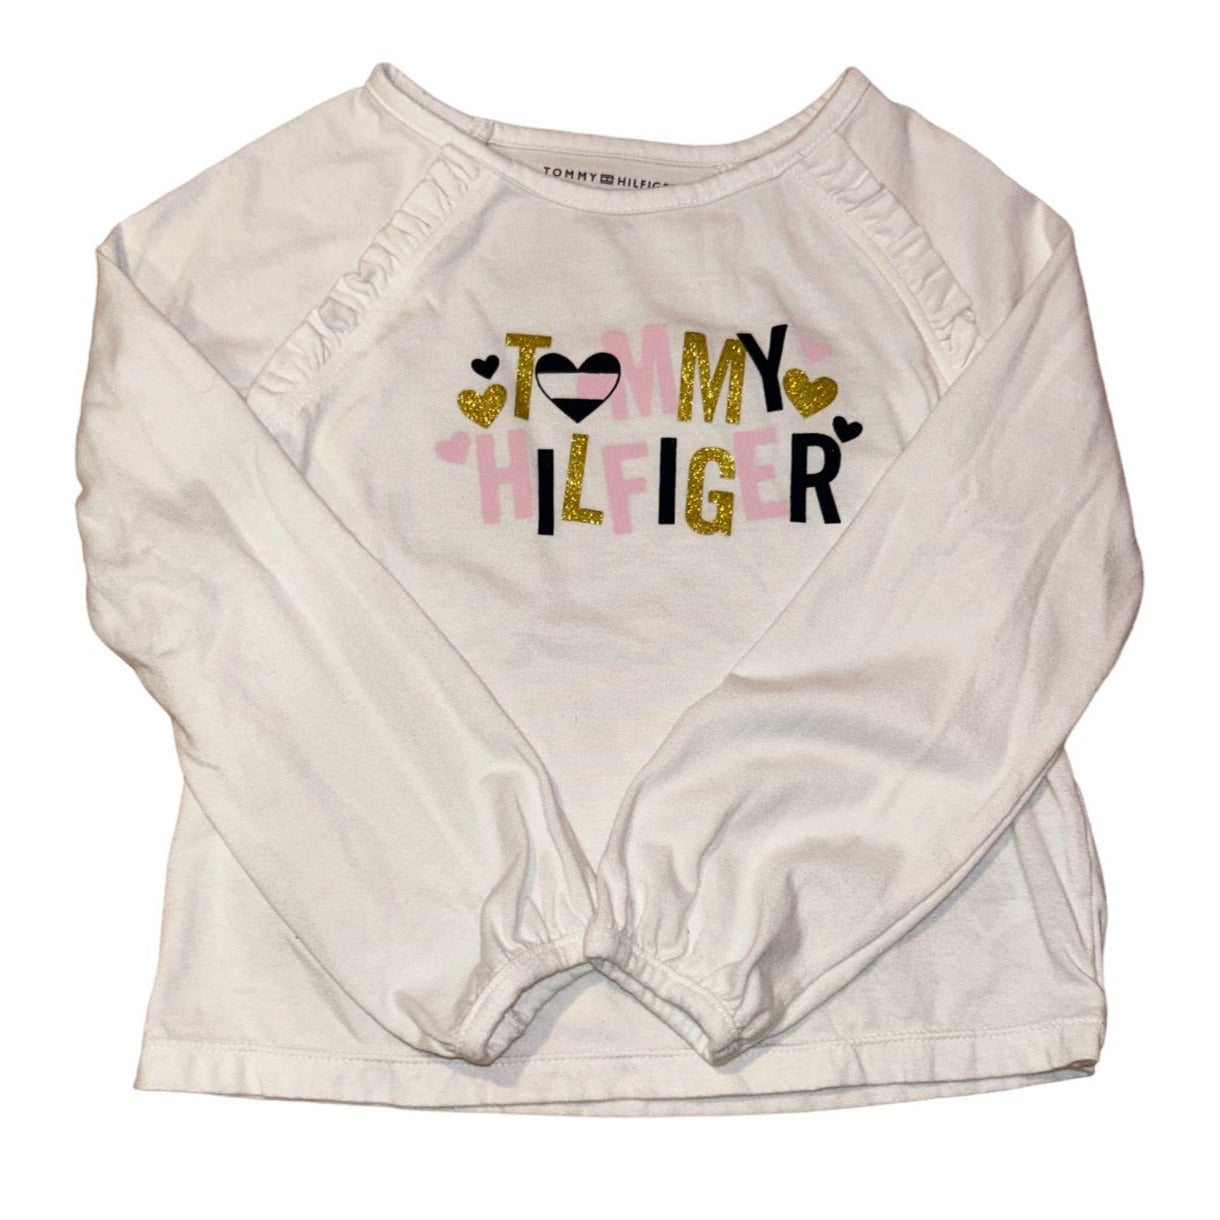 Girls Tommy Hilfiger Size 5 White Shimmer Hearts Long Sleeve Top